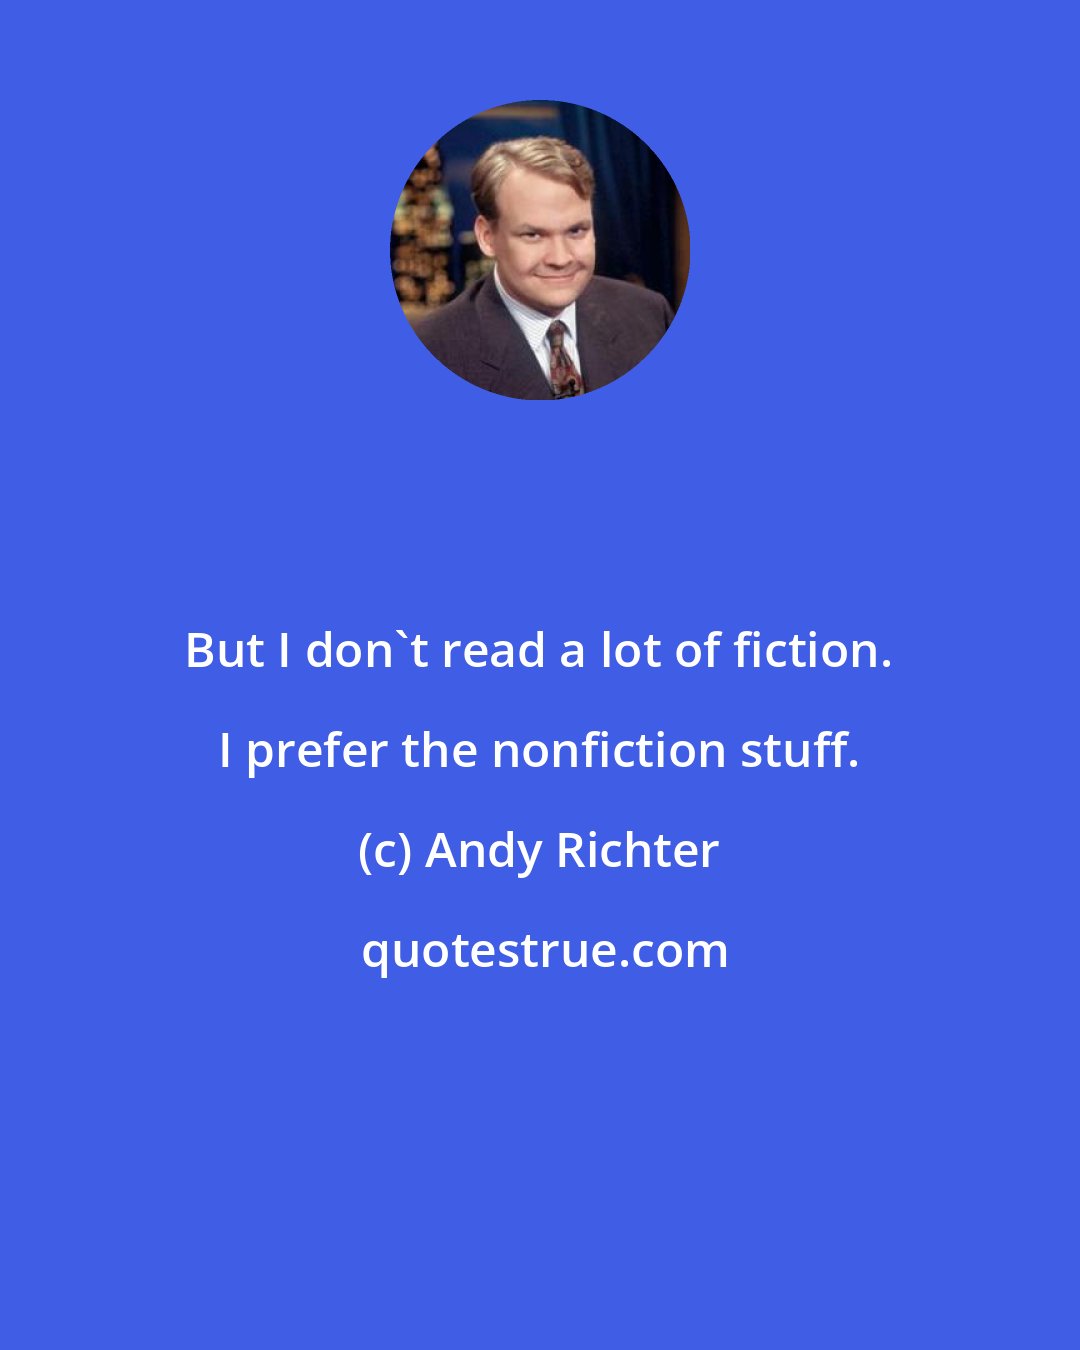 Andy Richter: But I don't read a lot of fiction. I prefer the nonfiction stuff.